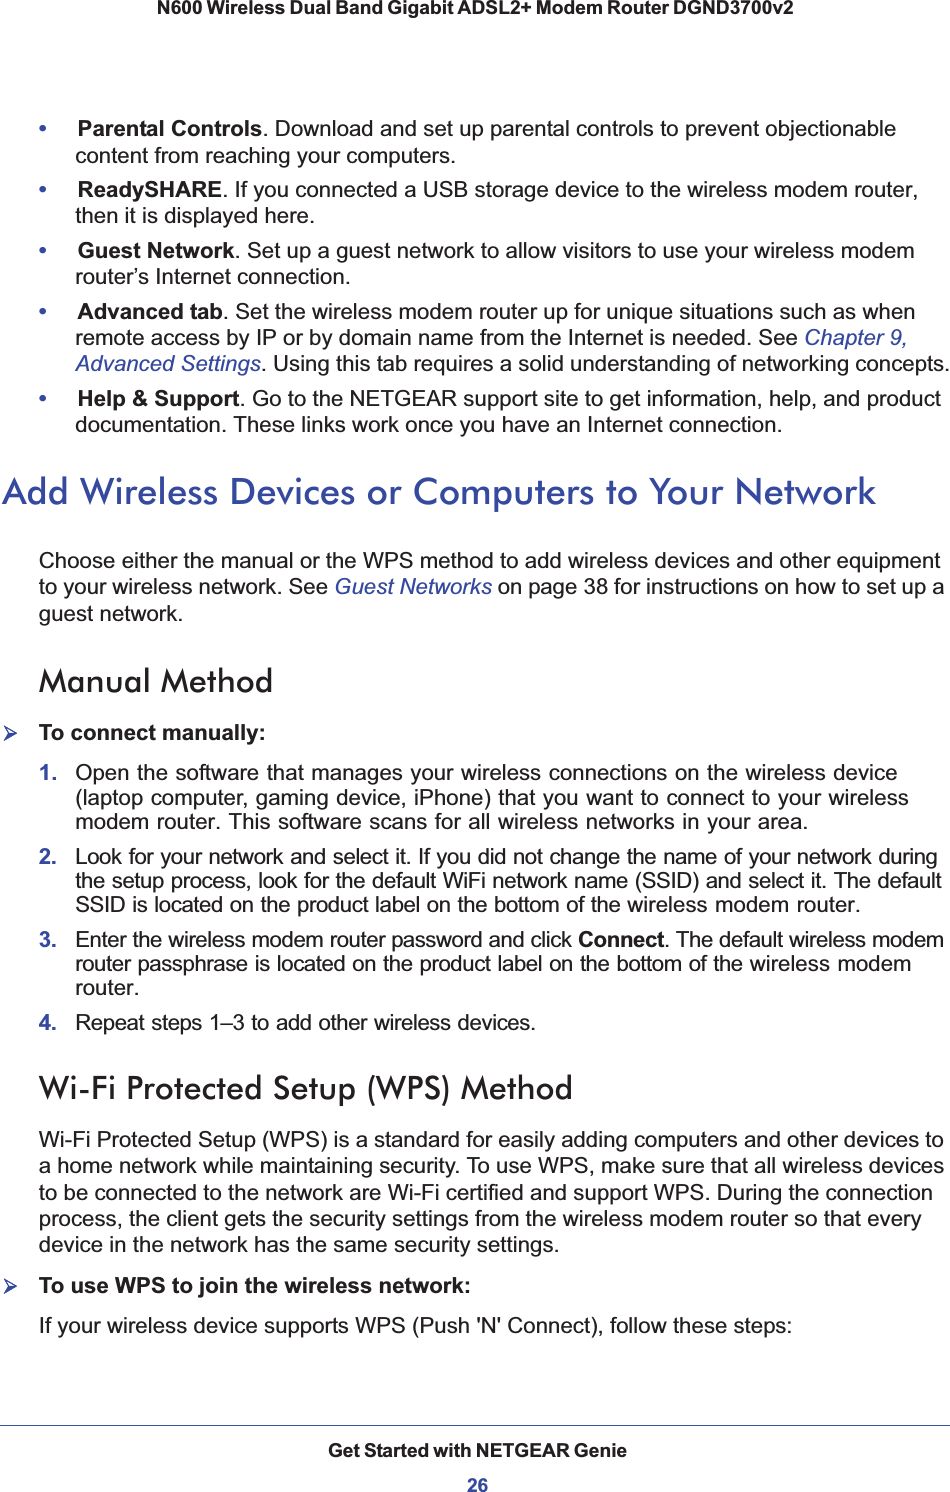 Get Started with NETGEAR Genie26N600 Wireless Dual Band Gigabit ADSL2+ Modem Router DGND3700v2 •Parental Controls. Download and set up parental controls to prevent objectionable content from reaching your computers. •ReadySHARE. If you connected a USB storage device to the wireless modem router, then it is displayed here.•Guest Network. Set up a guest network to allow visitors to use your wireless modem router’s Internet connection.•Advanced tab. Set the wireless modem router up for unique situations such as when remote access by IP or by domain name from the Internet is needed. See Chapter 9, Advanced Settings. Using this tab requires a solid understanding of networking concepts.•Help &amp; Support. Go to the NETGEAR support site to get information, help, and product documentation. These links work once you have an Internet connection.Add Wireless Devices or Computers to Your NetworkChoose either the manual or the WPS method to add wireless devices and other equipment to your wireless network. See Guest Networks on page 38 for instructions on how to set up a guest network.Manual Method¾To connect manually:1. Open the software that manages your wireless connections on the wireless device (laptop computer, gaming device, iPhone) that you want to connect to your wireless modem router. This software scans for all wireless networks in your area.2.  Look for your network and select it. If you did not change the name of your network during the setup process, look for the default WiFi network name (SSID) and select it. The default SSID is located on the product label on the bottom of the wireless modem router.3.  Enter the wireless modem router password and click Connect. The default wireless modem router passphrase is located on the product label on the bottom of the wireless modem router.4.  Repeat steps 1–3 to add other wireless devices.Wi-Fi Protected Setup (WPS) MethodWi-Fi Protected Setup (WPS) is a standard for easily adding computers and other devices to a home network while maintaining security. To use WPS, make sure that all wireless devices to be connected to the network are Wi-Fi certified and support WPS. During the connection process, the client gets the security settings from the wireless modem router so that every device in the network has the same security settings.¾To use WPS to join the wireless network:If your wireless device supports WPS (Push &apos;N&apos; Connect), follow these steps: